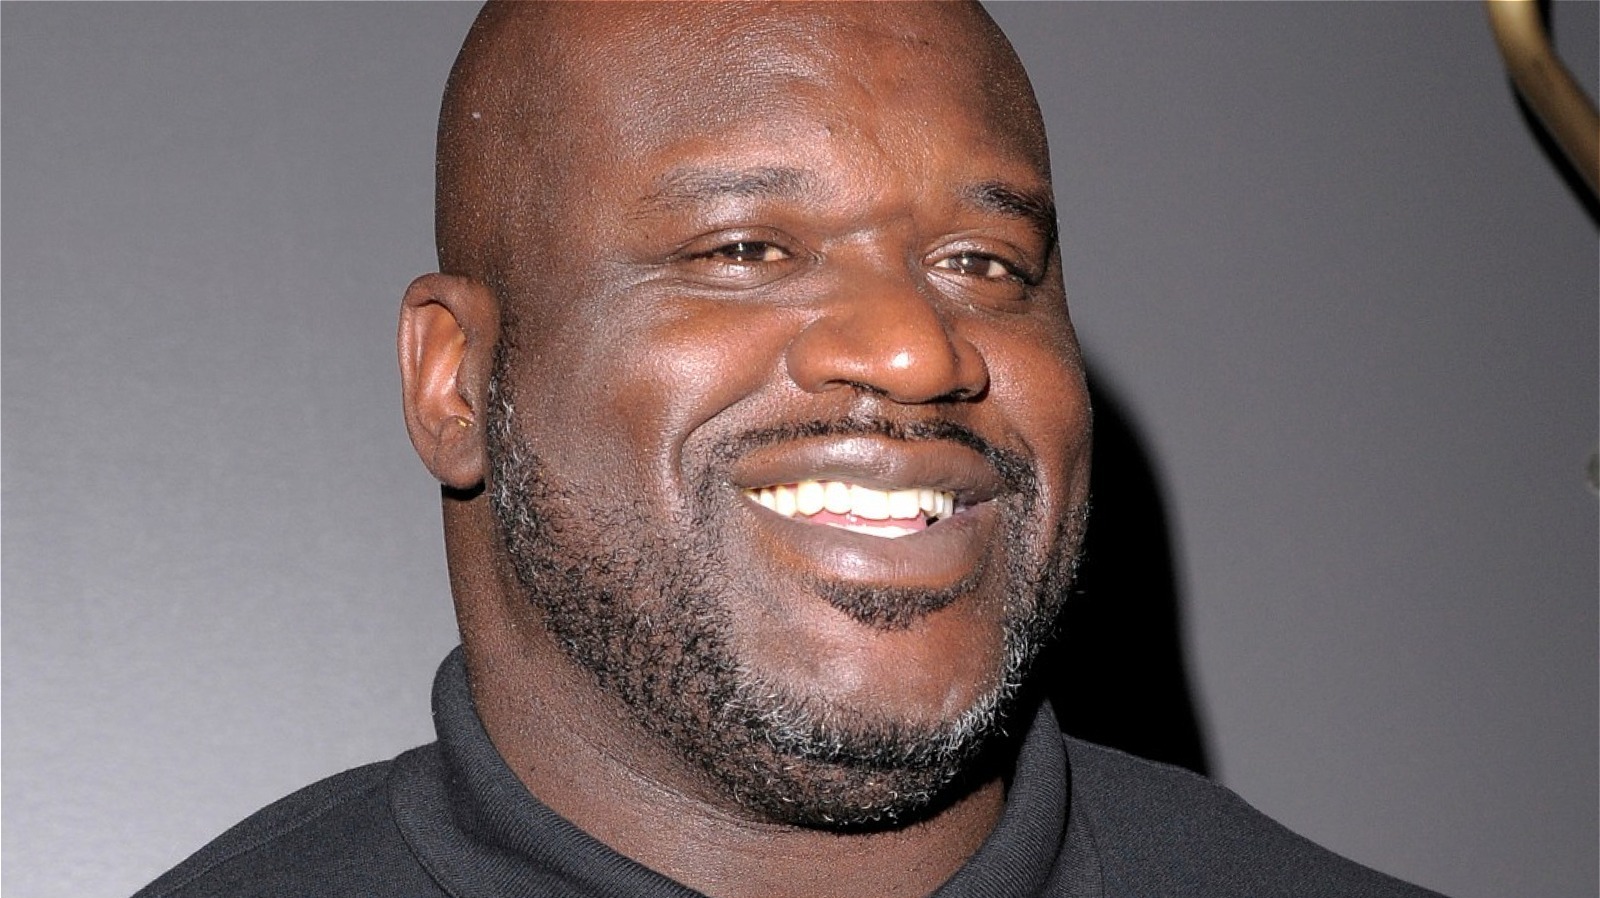 ASU's Mullett Arena features food lineup including Shaq's Big Chicken